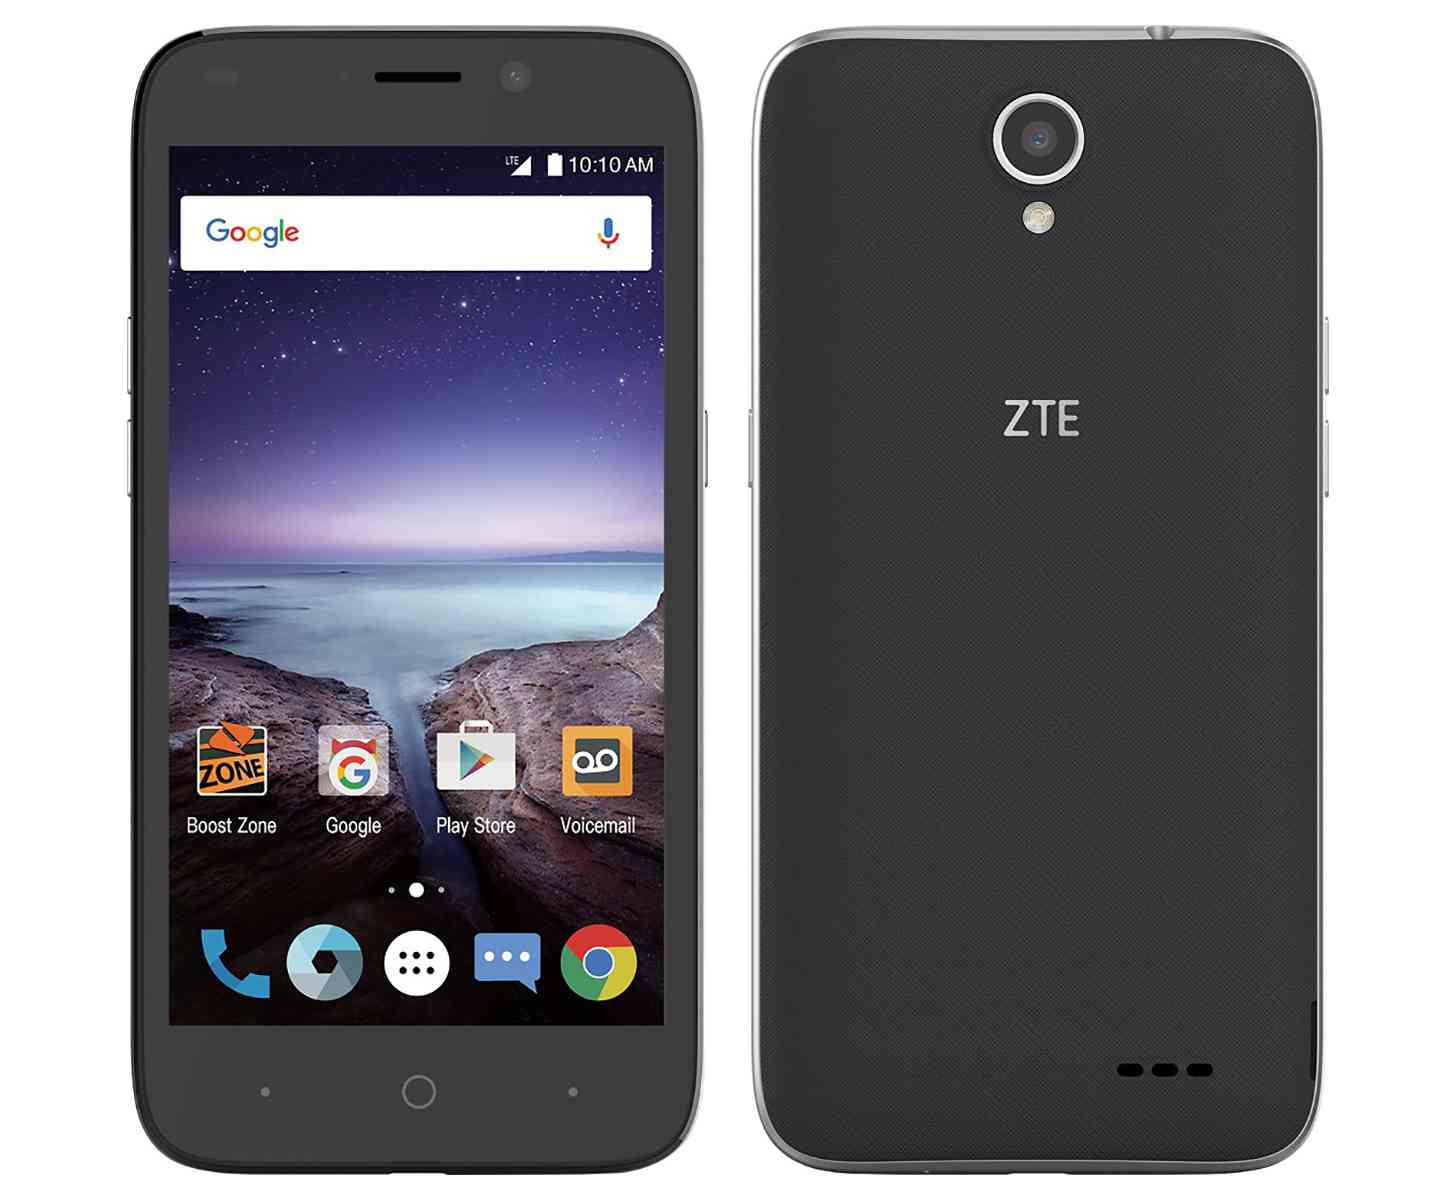 ZTE Prestige 2 is an affordable Android phone for Boost Mobile and